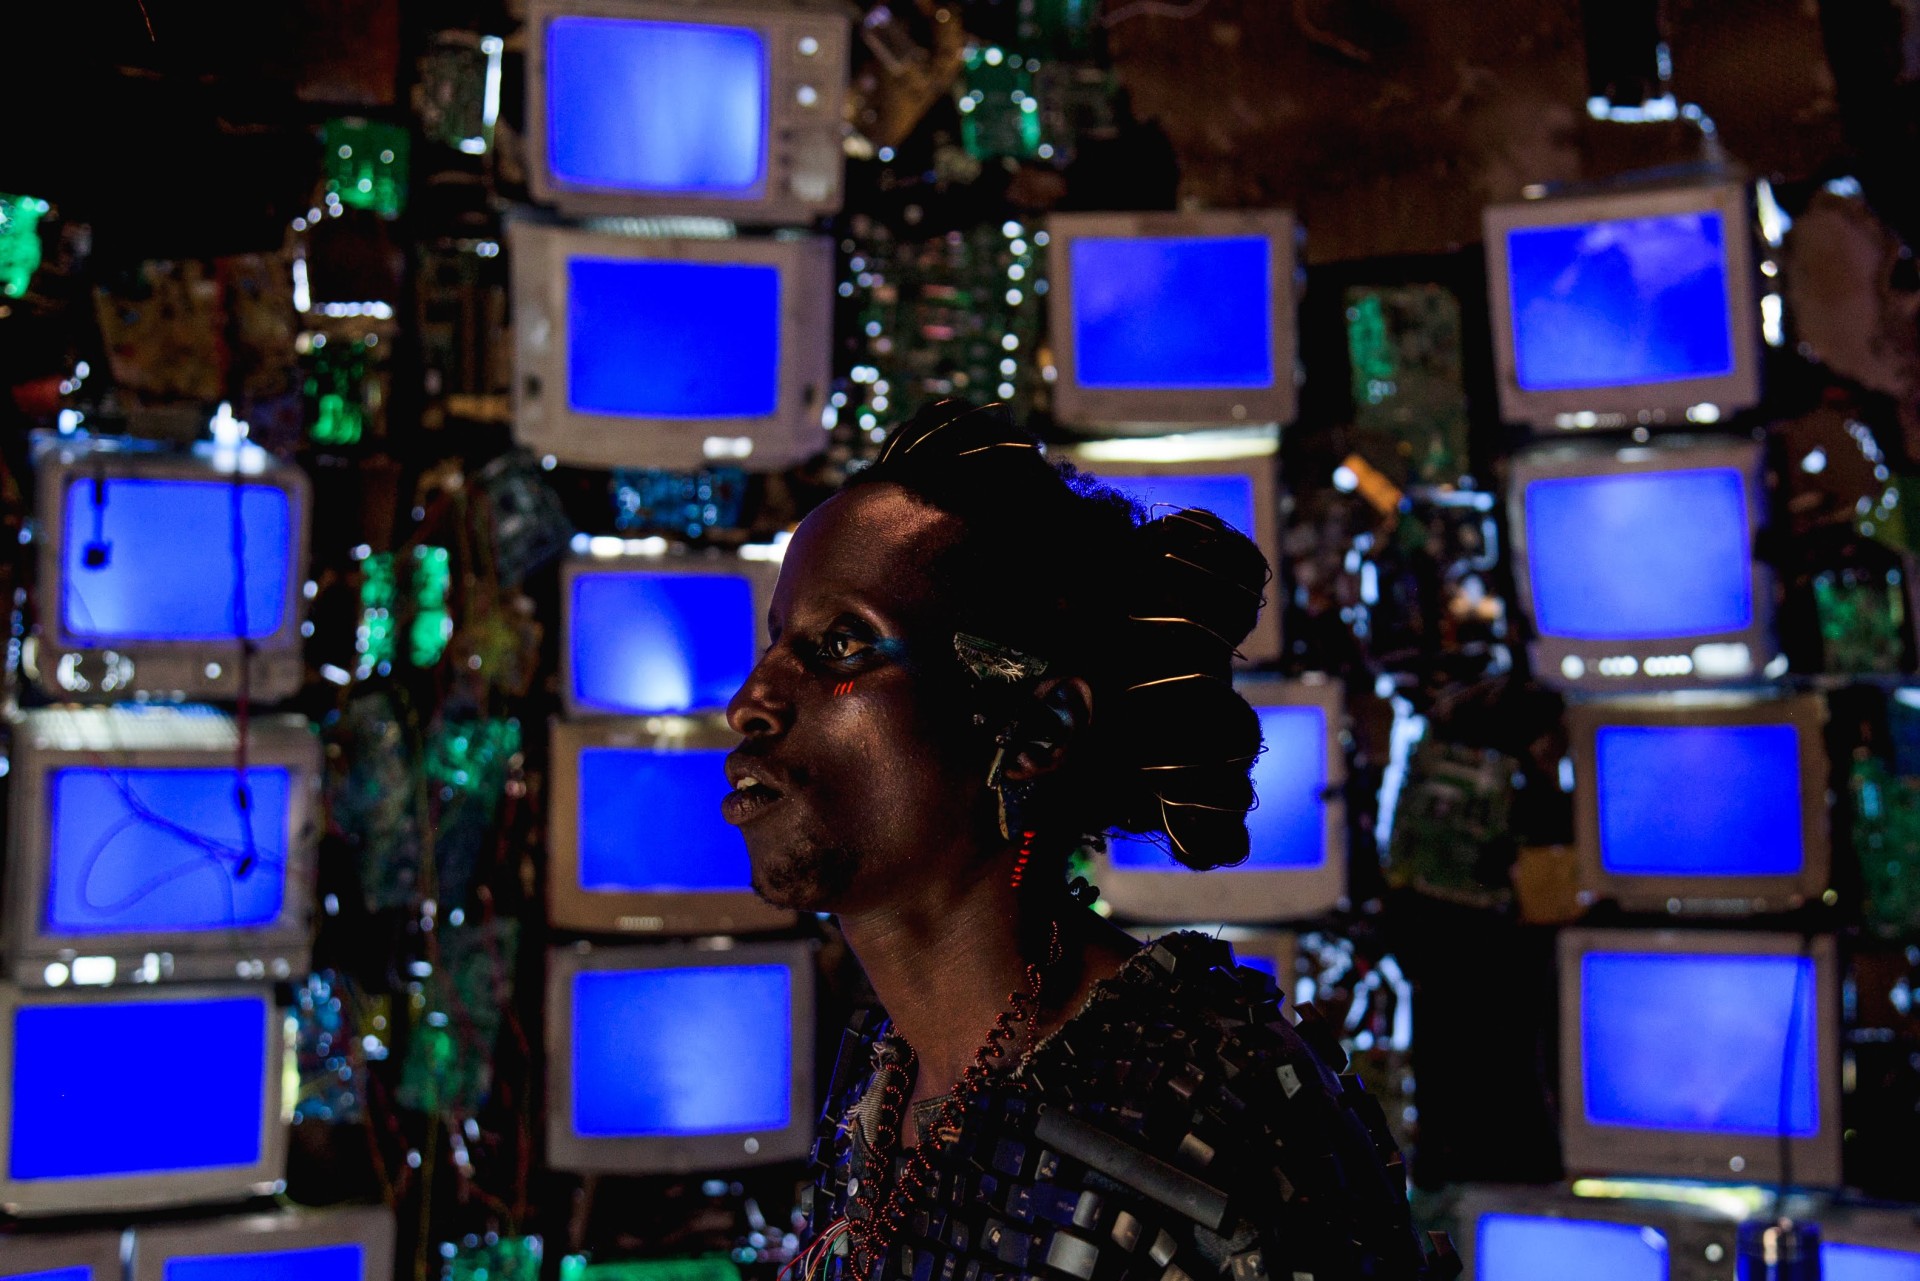 A still from Neptune Frost directed by Saul Williams. A dark skinned person in front of stacks of blue screened computers.